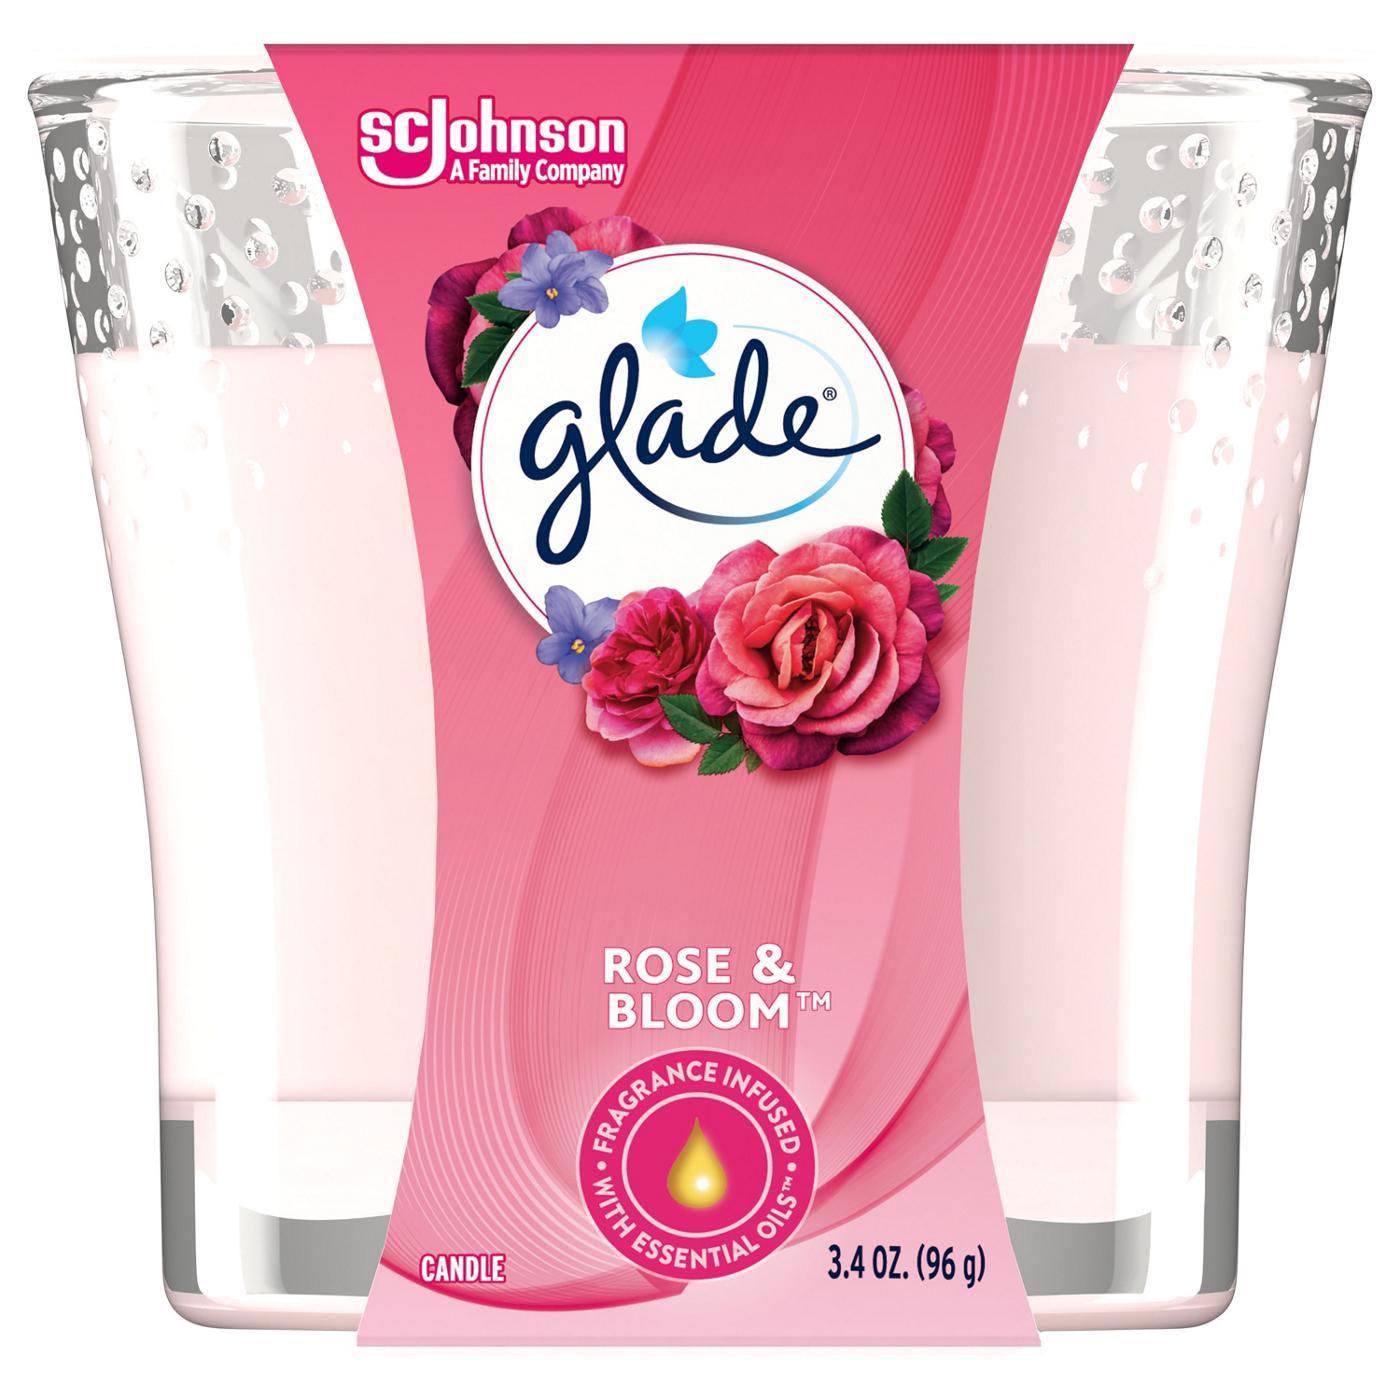 Glade Rose & Bloom Candle; image 1 of 3